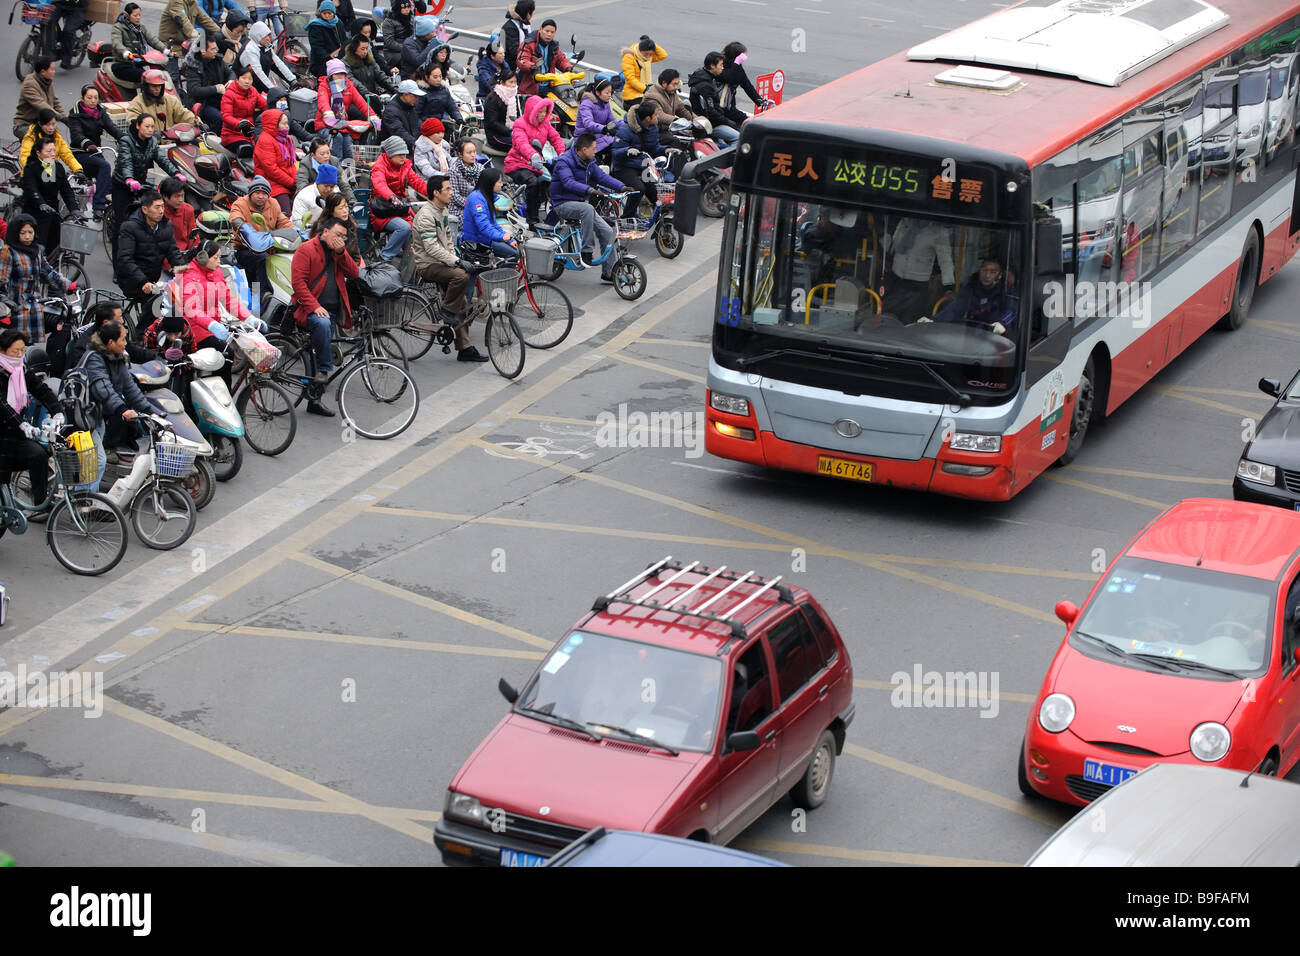 Crowd on bicycles and motor bikes crossing over in Shanghai Stock Photo